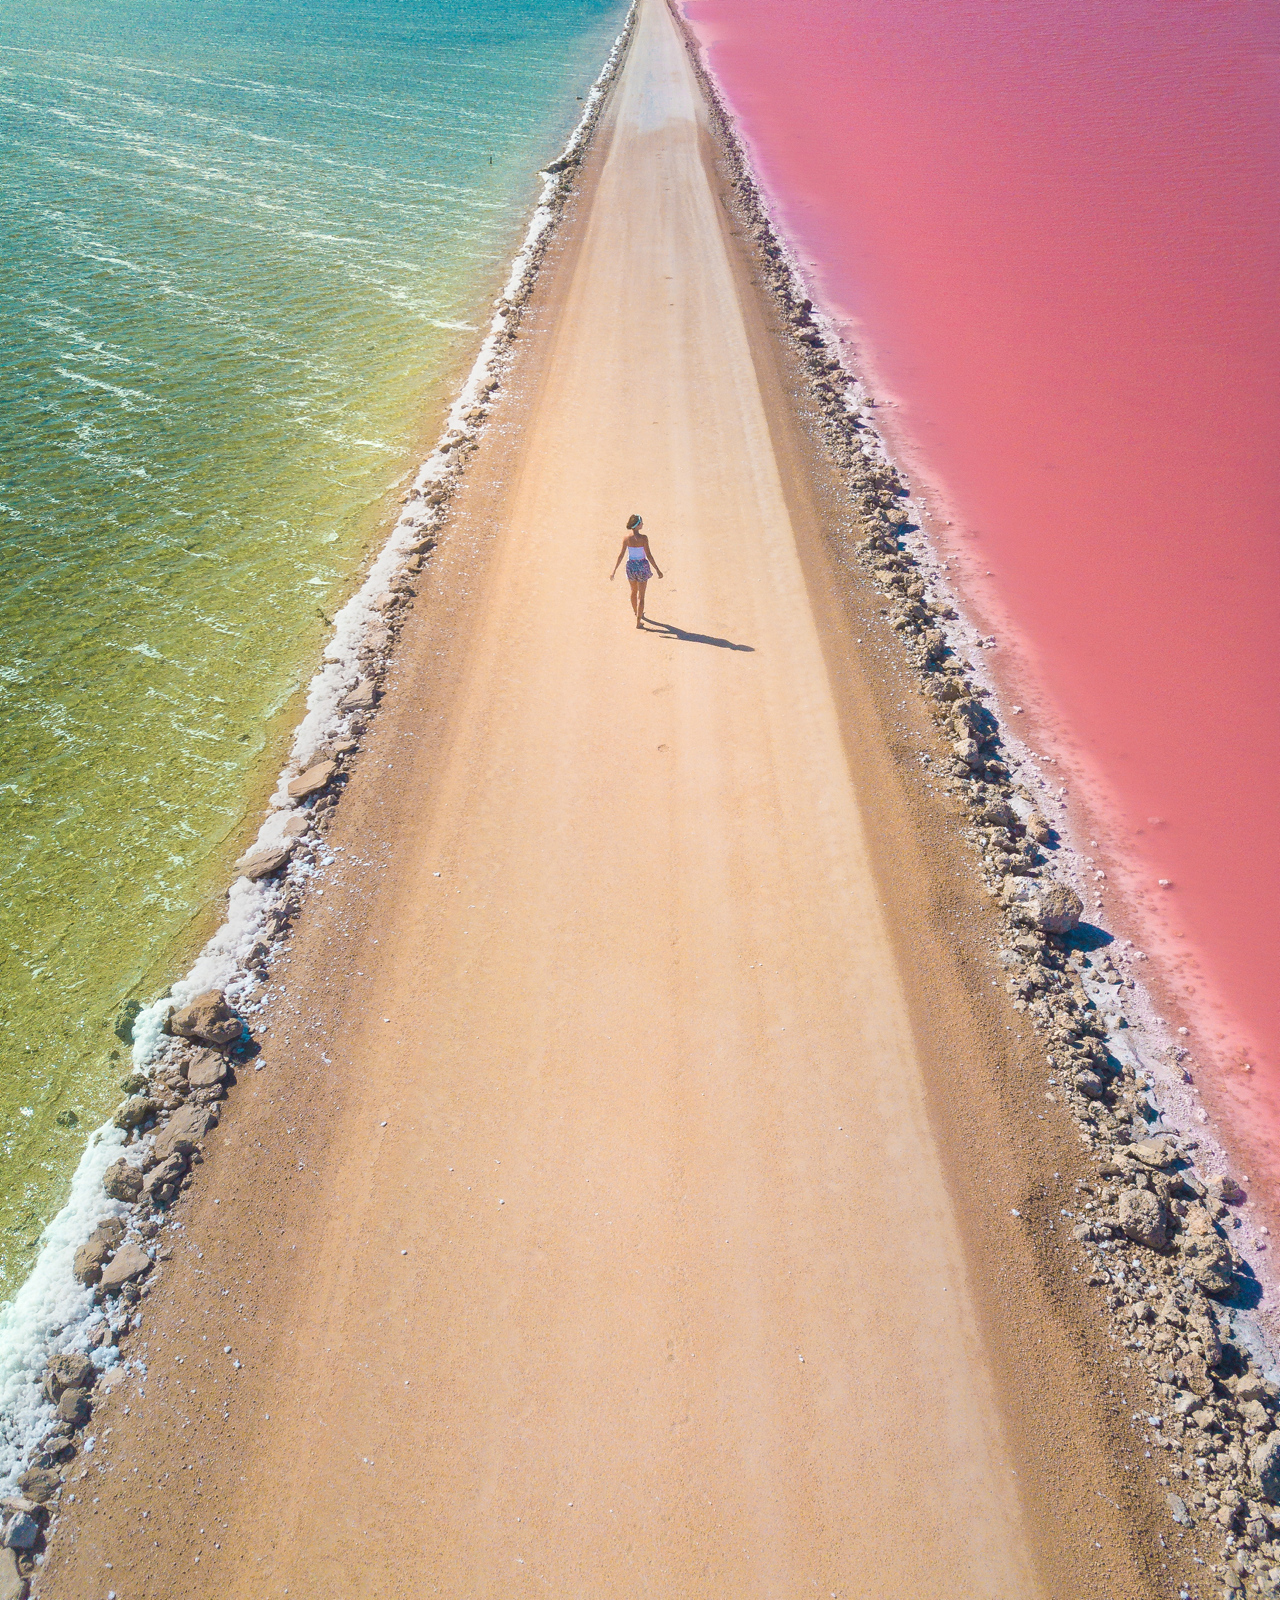 10 of South Australia's most Instaworthy locations